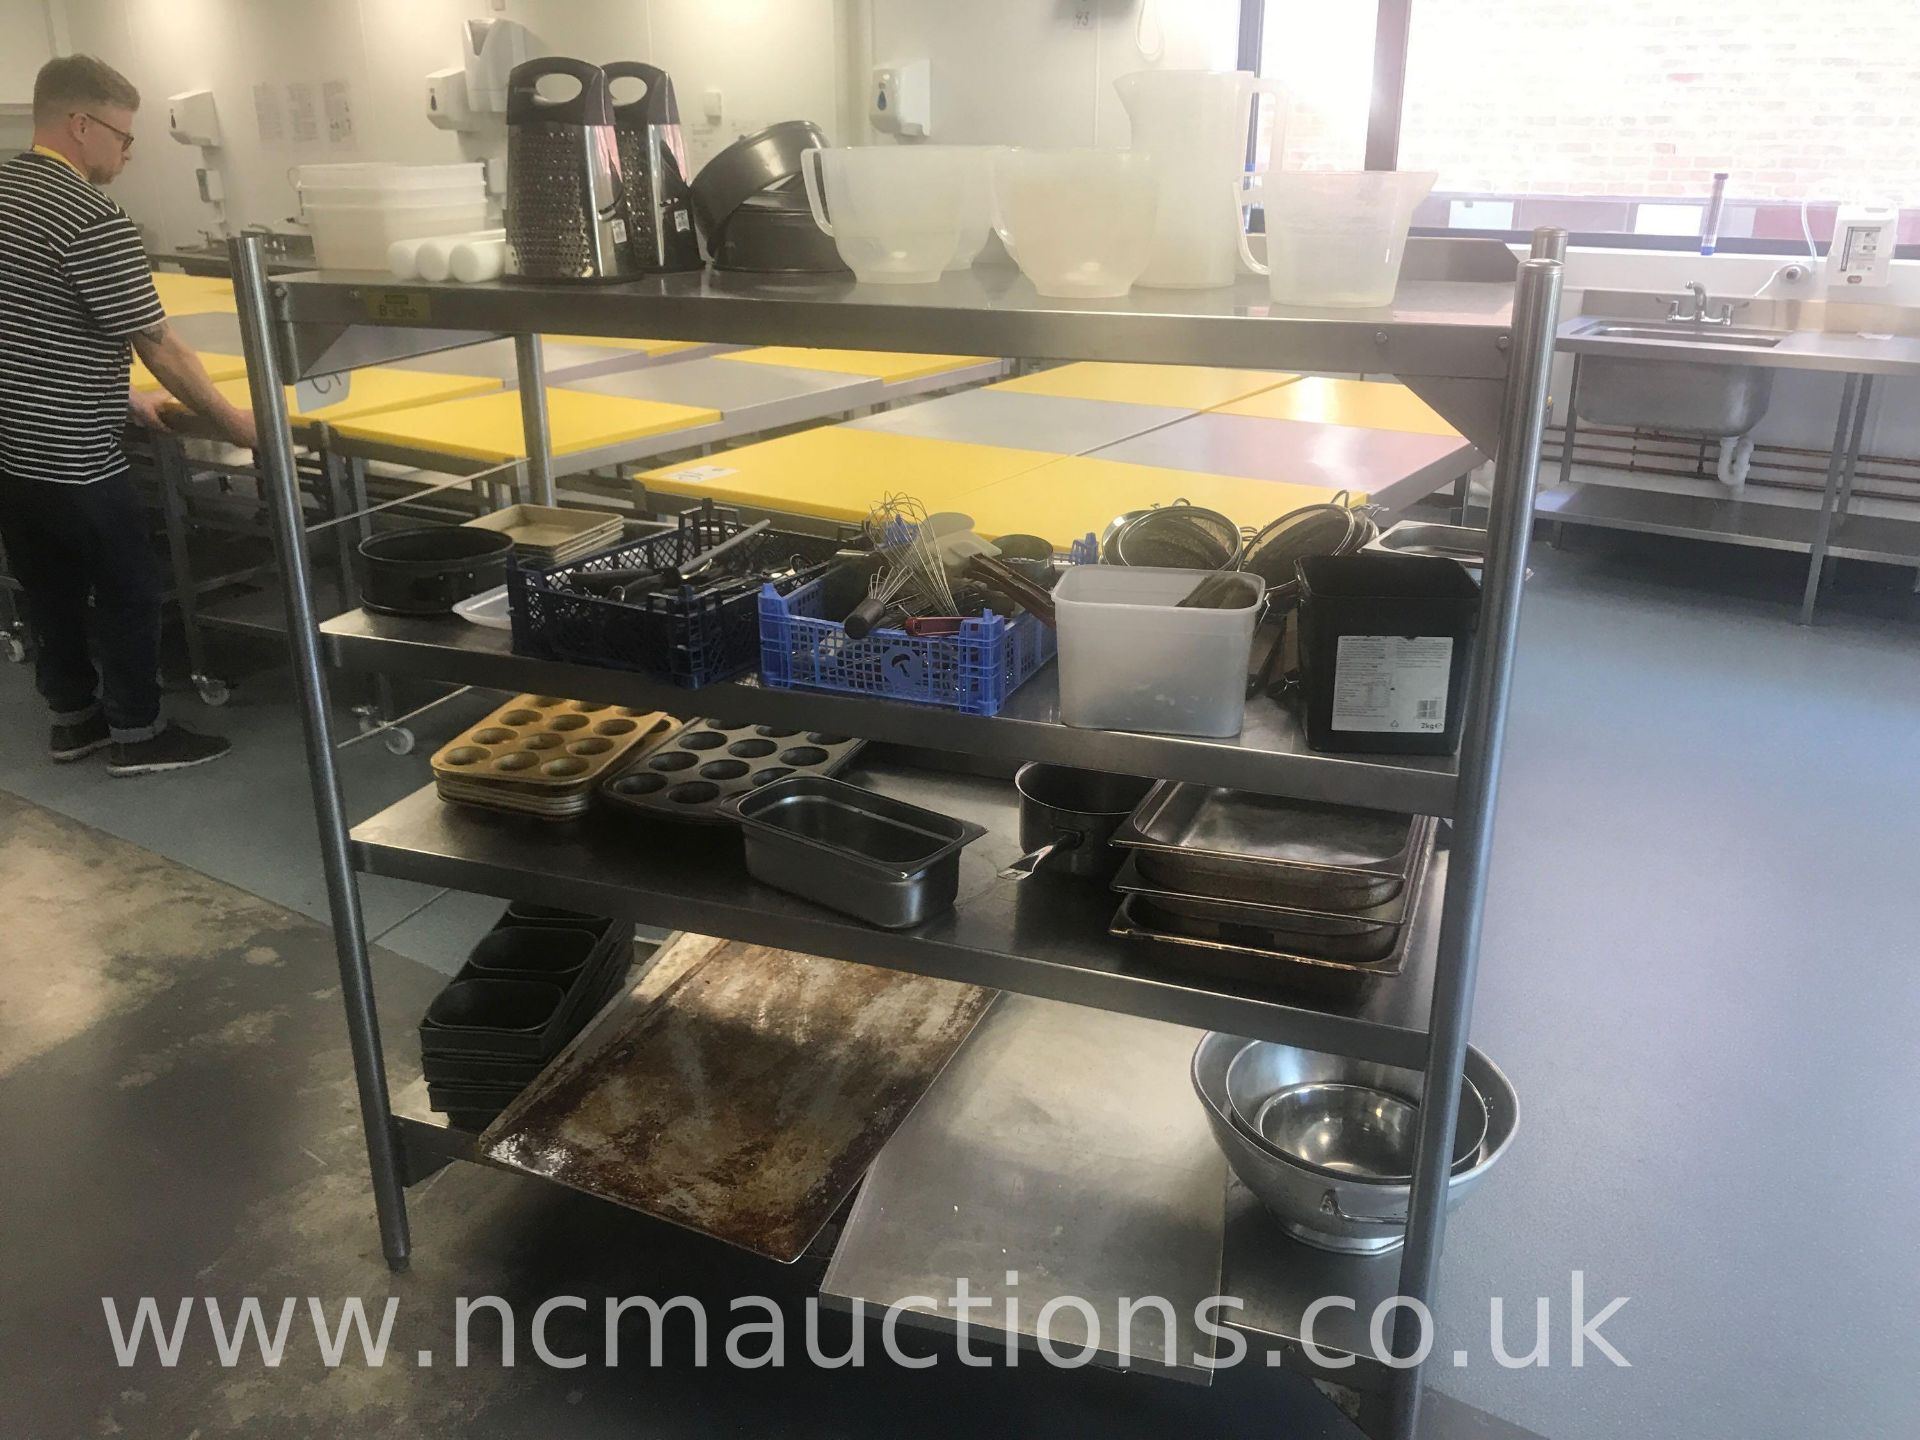 Steel Racking with Catering Equipment